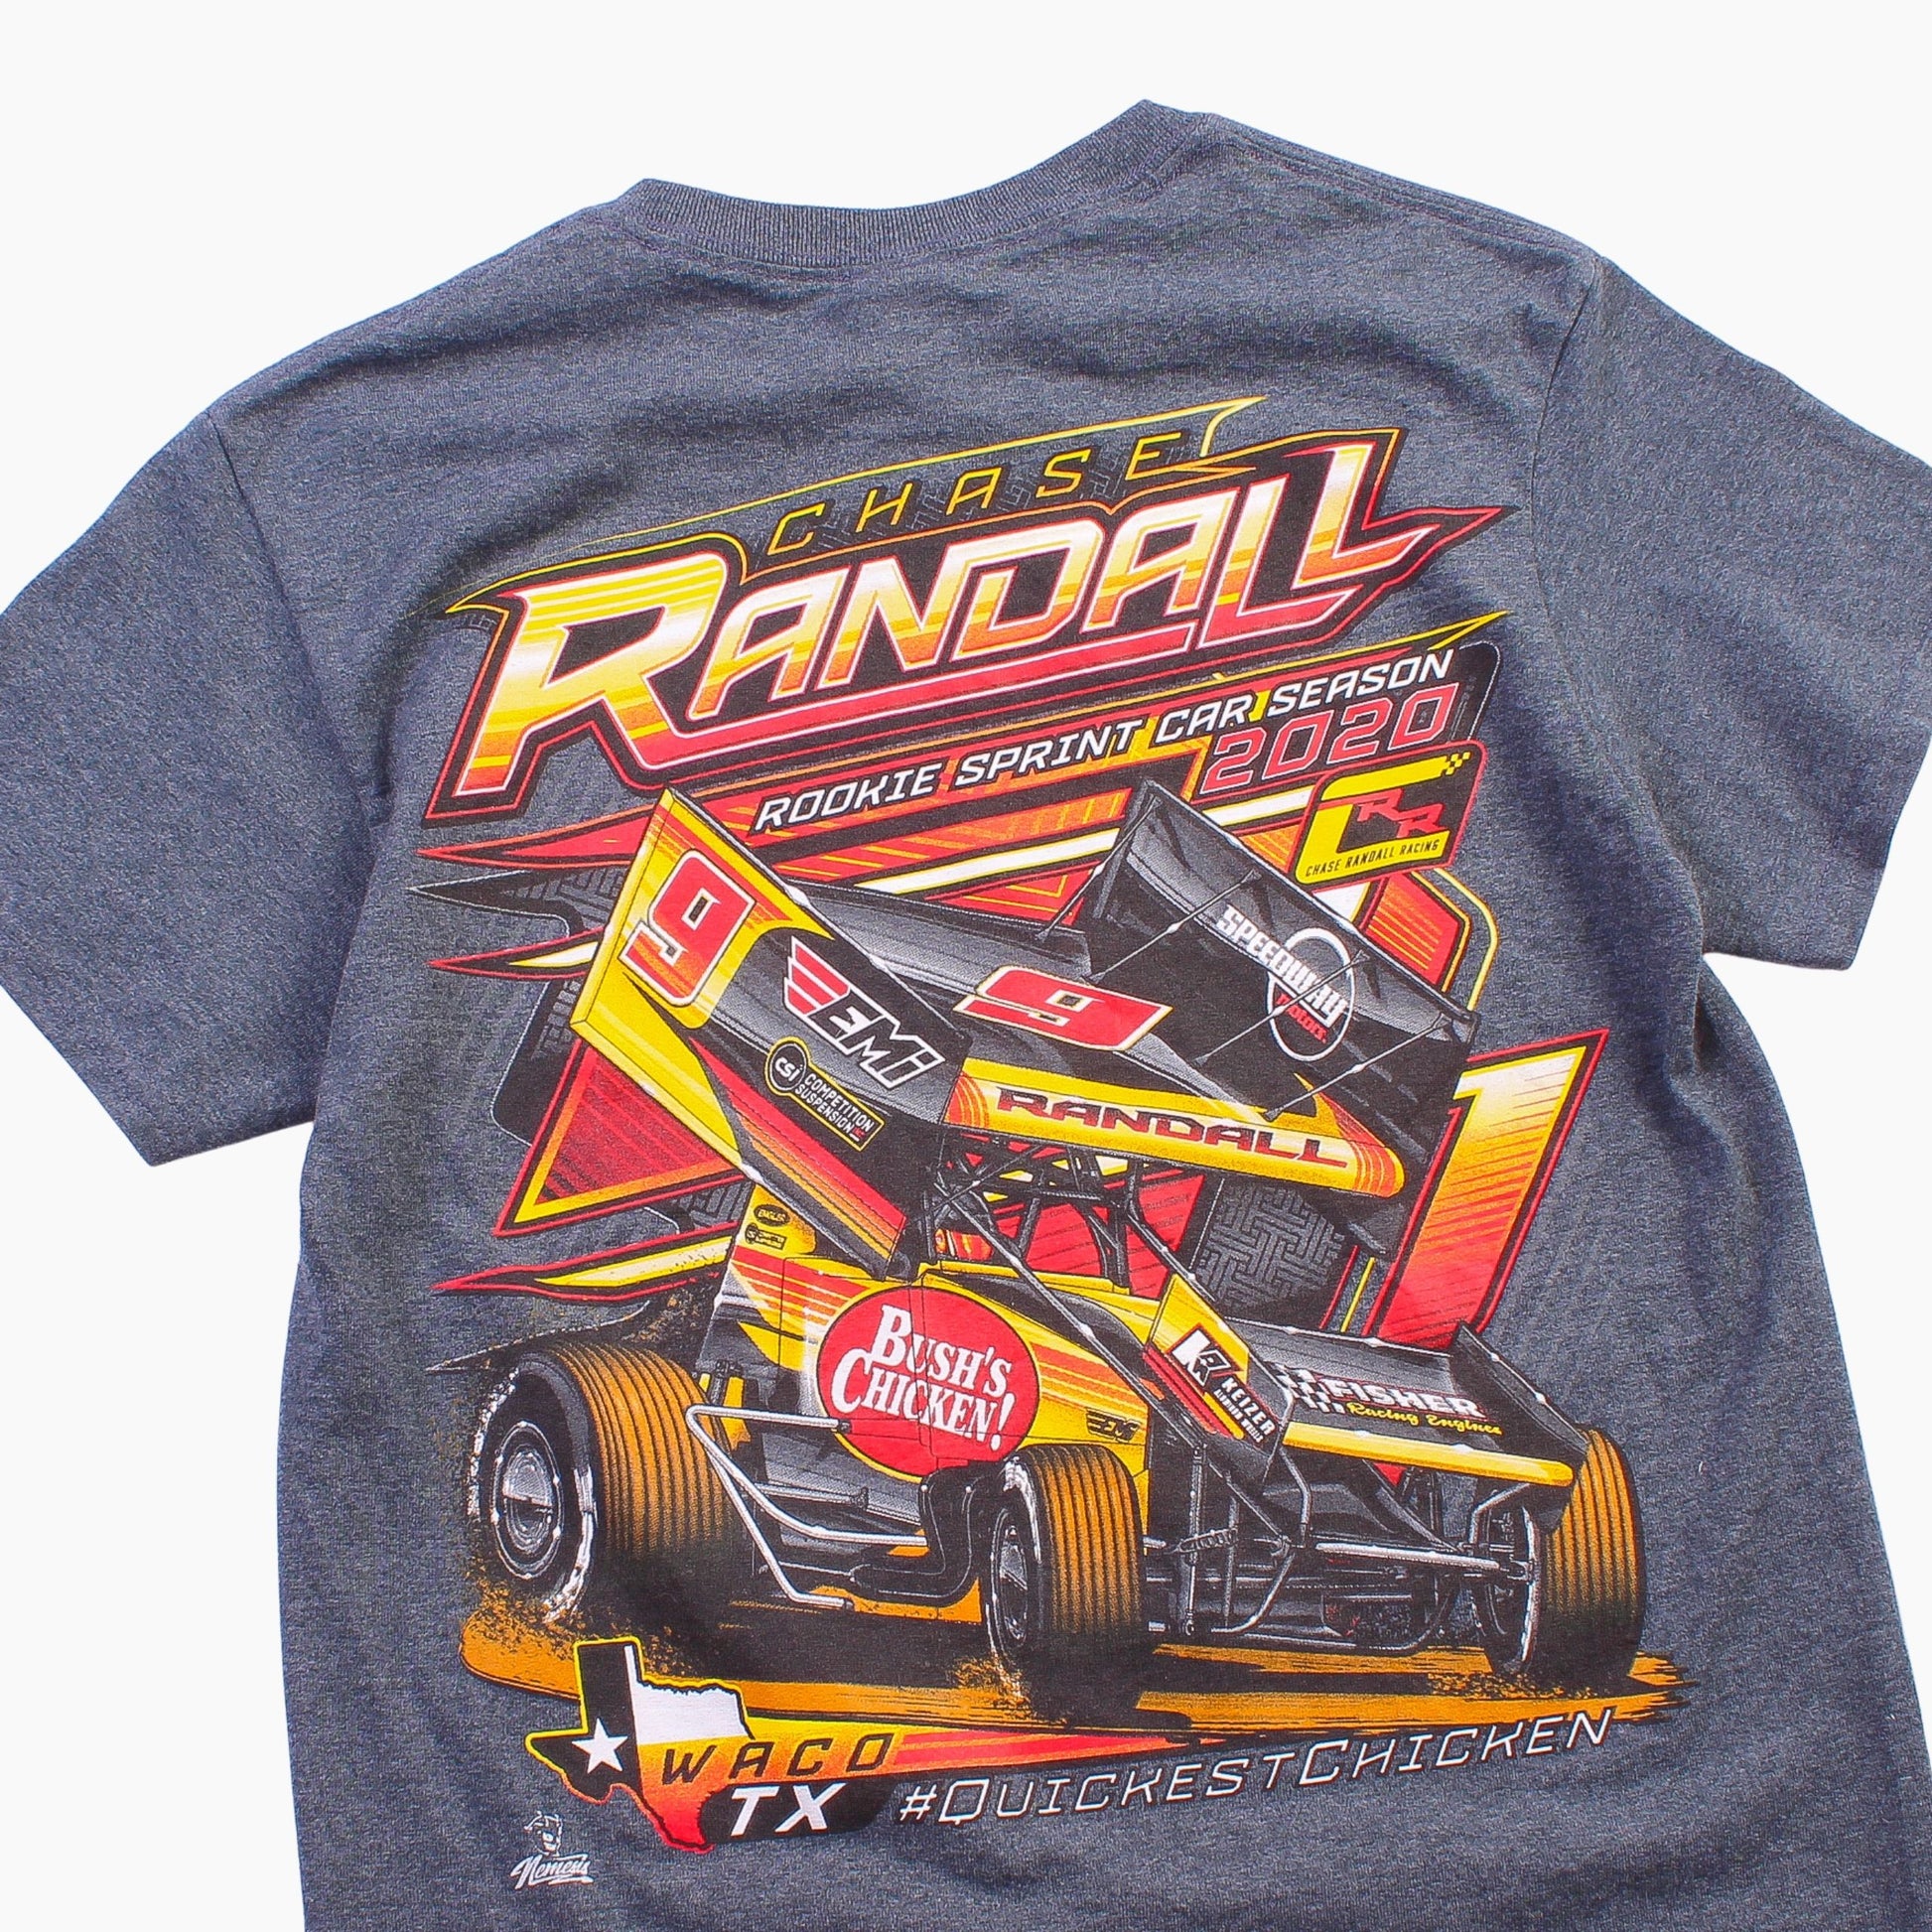 Vintage 'Chase Randall' T-Shirt - American Madness